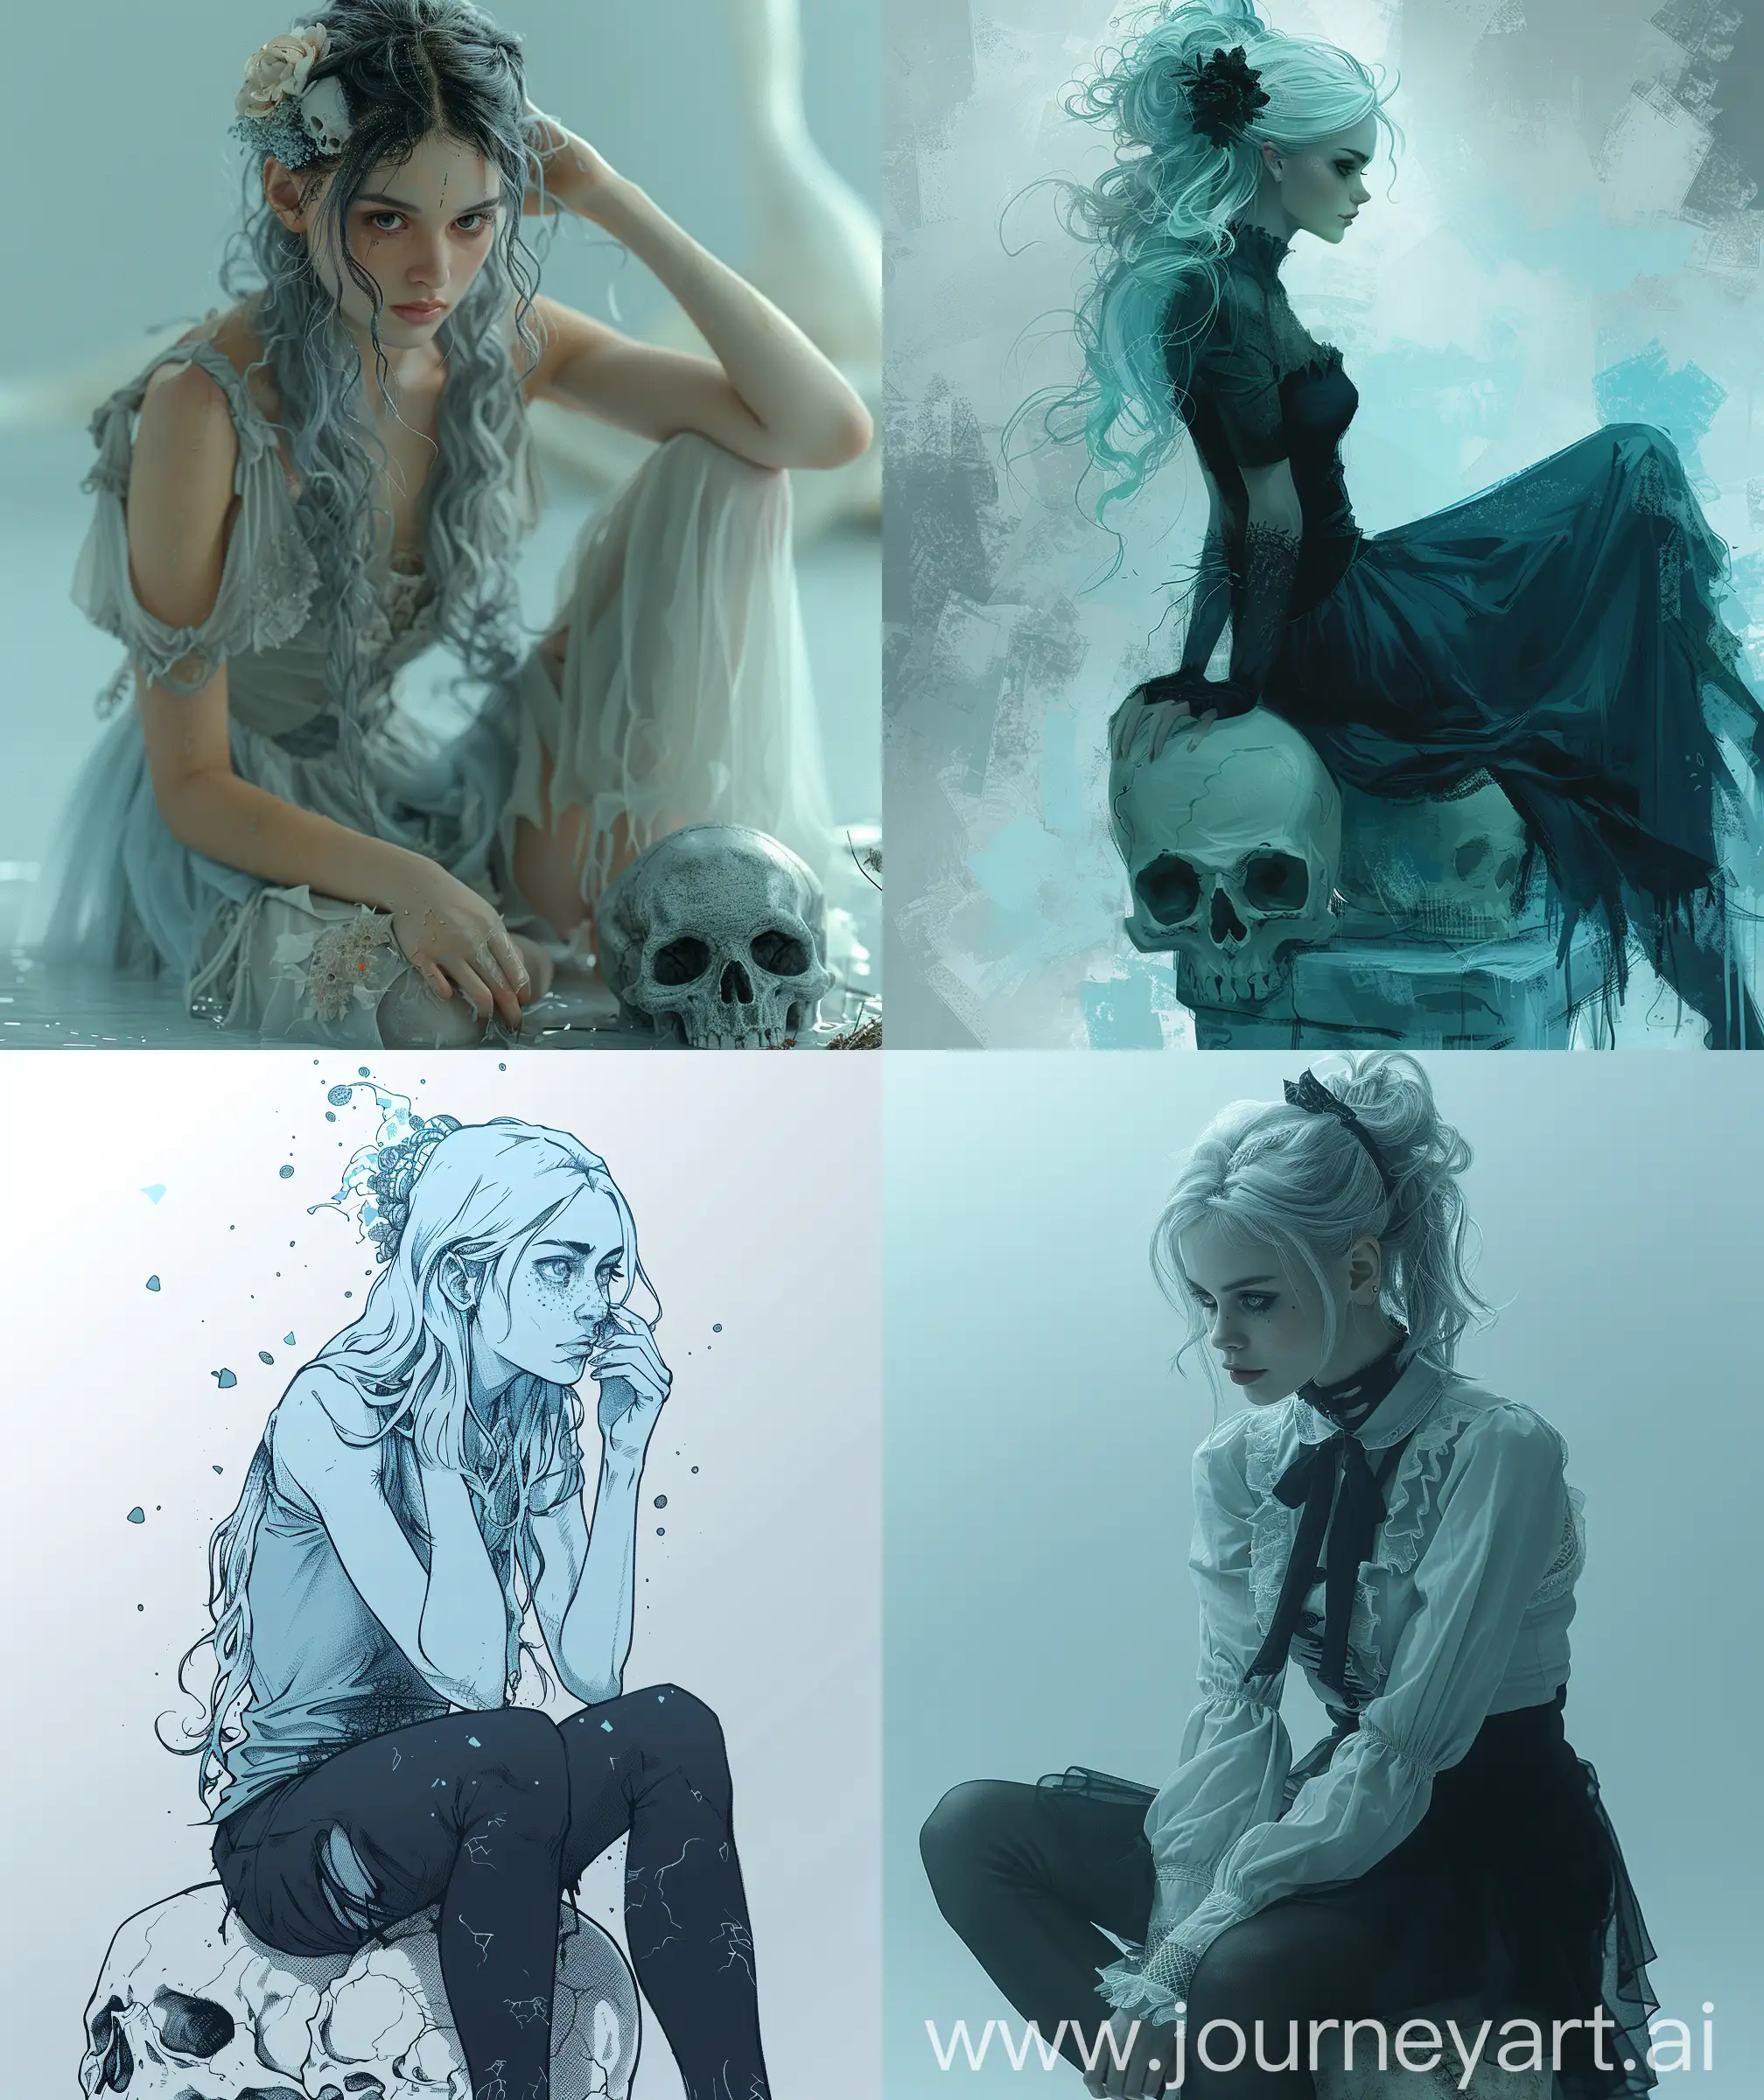 Anime style, illustration, one woman, no time for talk , scary but elegant, surreal style, elegant and beautiful, gliter on her hair, villainess, light grey and blue mix background gradient, sit on skull ,art by Sam Weber, severian , --ar 27:32 --s 400